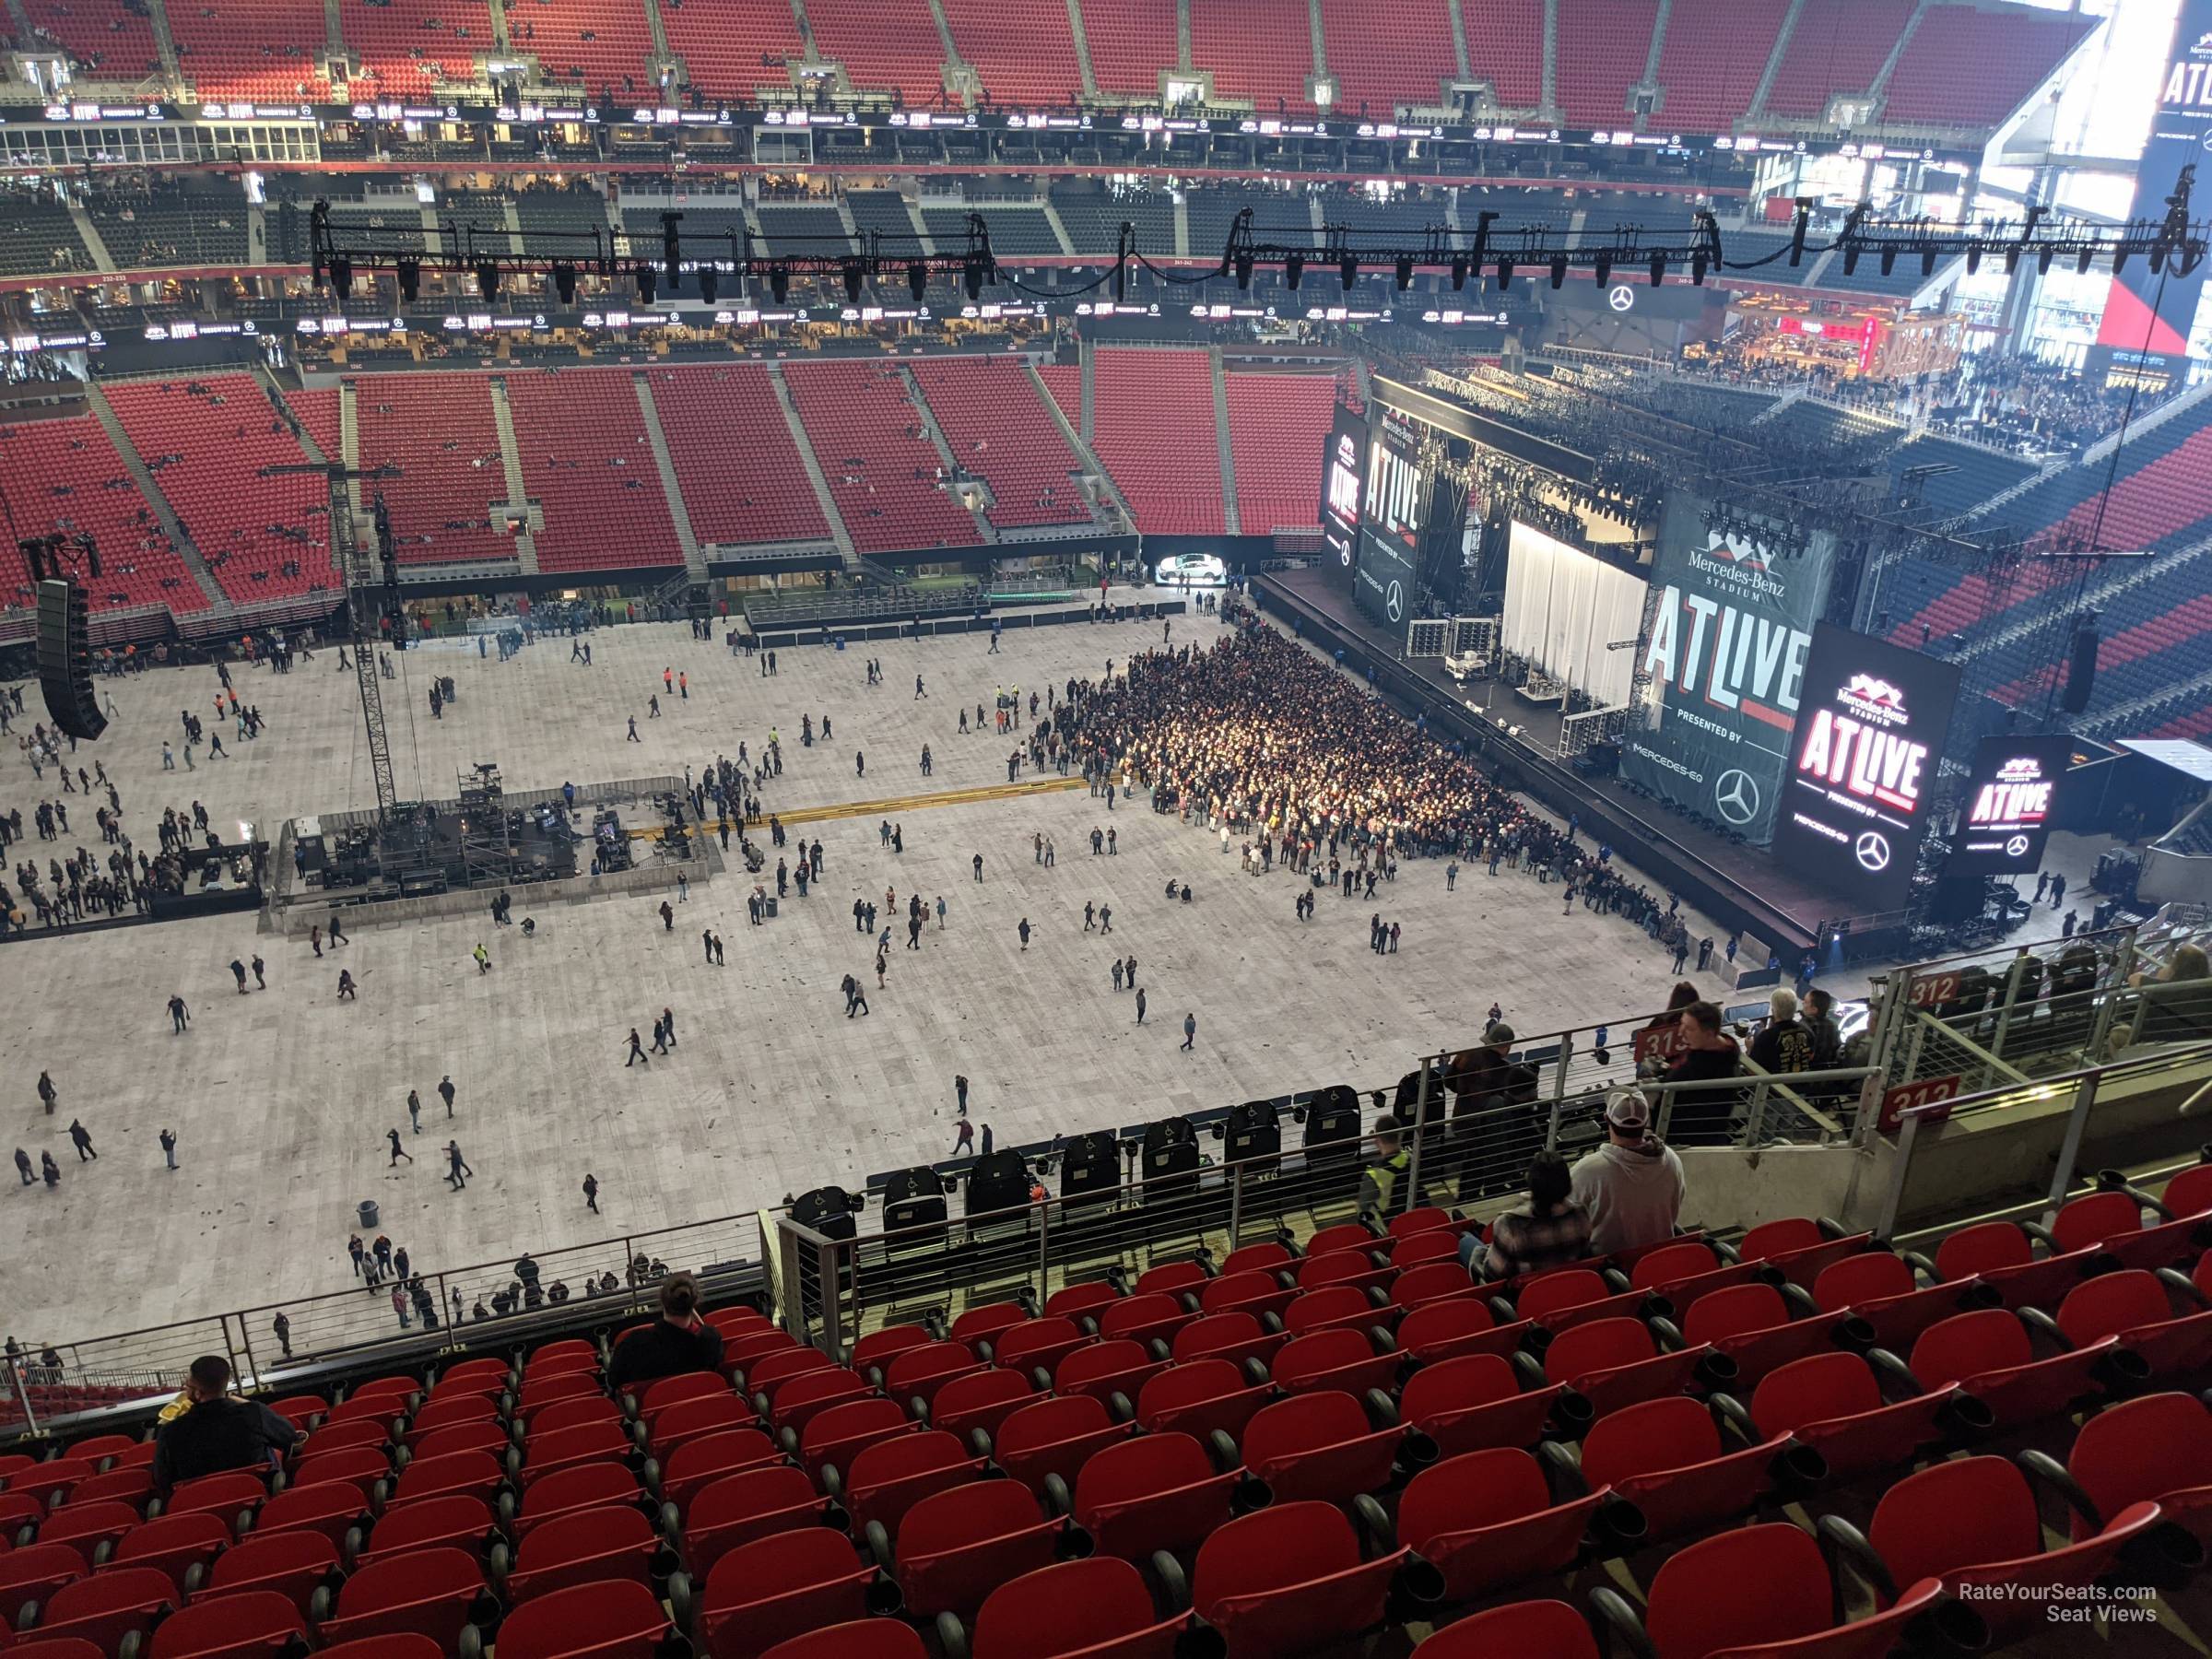 section 313, row 13 seat view  for concert - mercedes-benz stadium